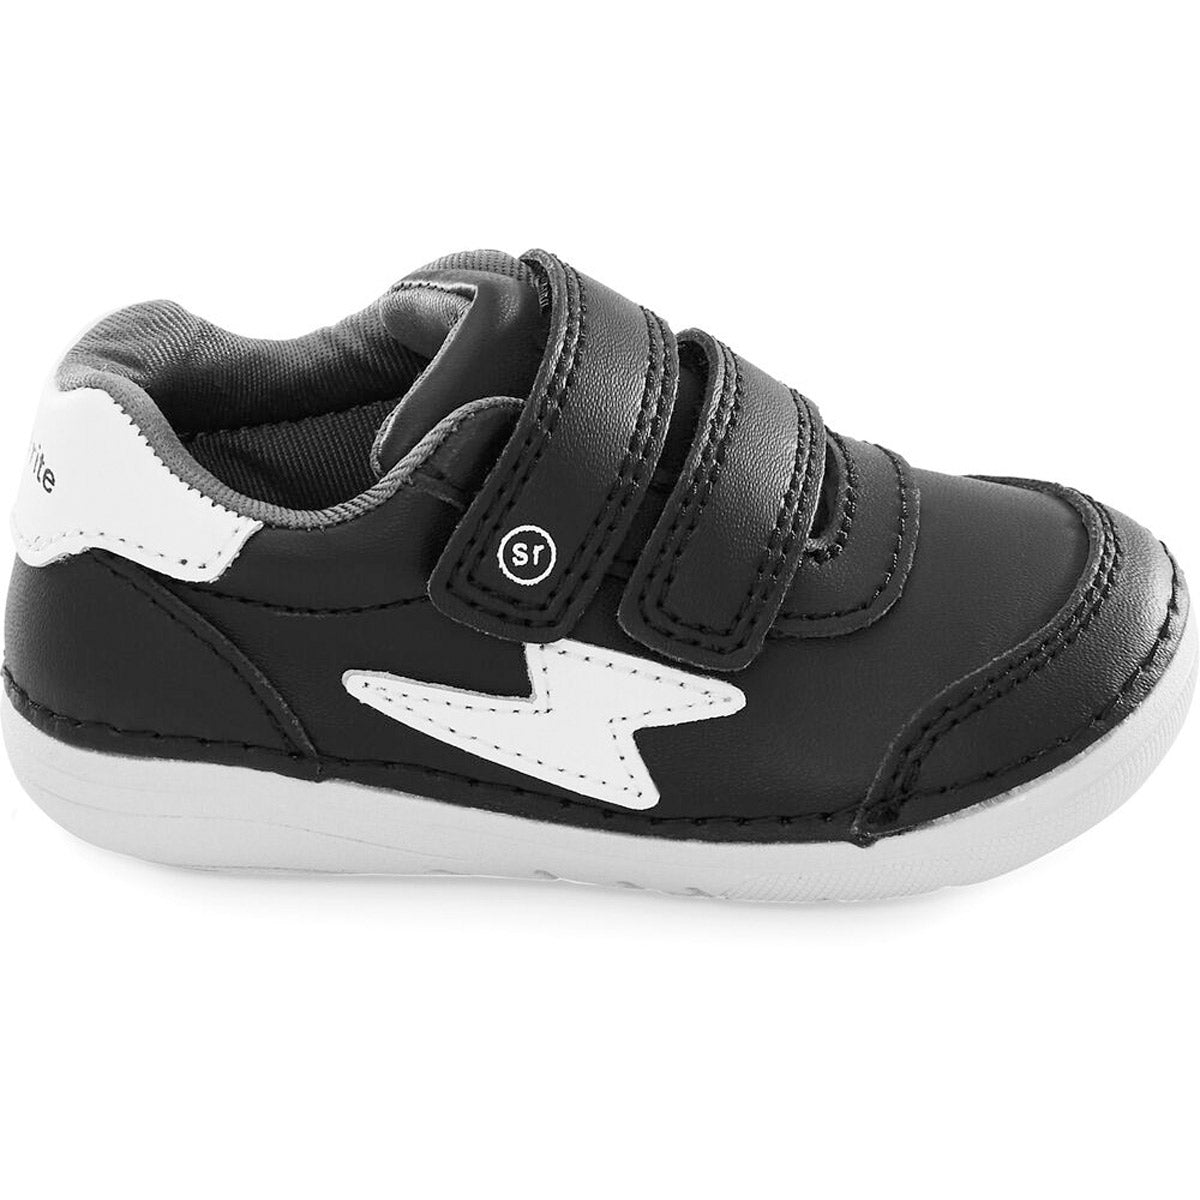 A single black and white Stride Rite SM Kennedy Black - Kids toddler&#39;s shoe with memory foam insoles and velcro straps.